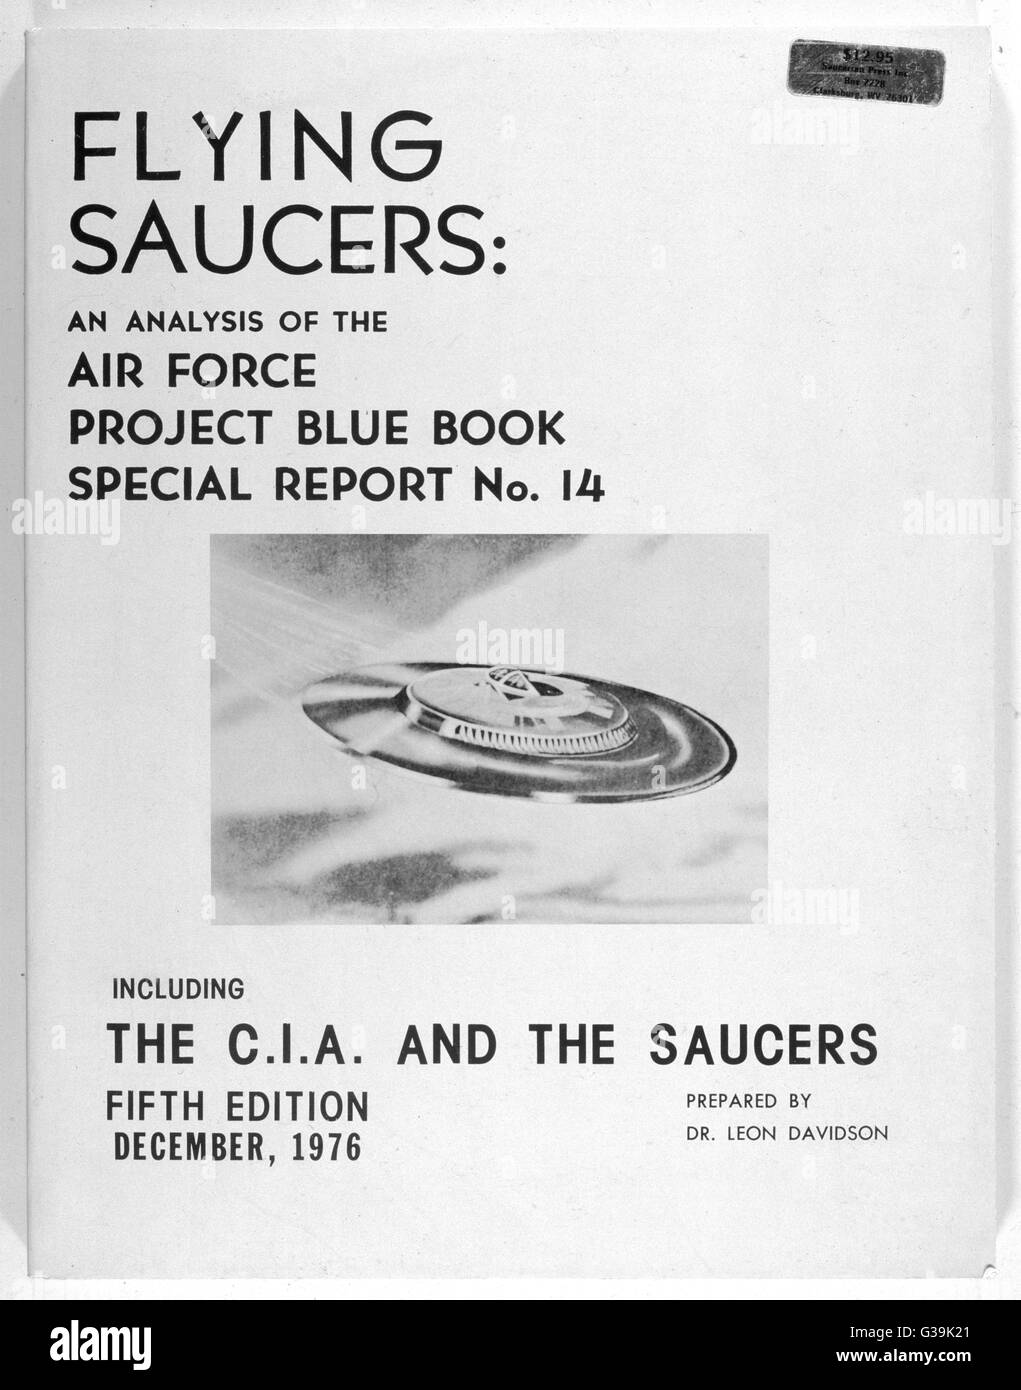 FLYING SAUCERS An analysis of the Air Force Project Blue Book Special  Report no 14, by Leon Davidson Date: 5 May 1955 Stock Photo - Alamy